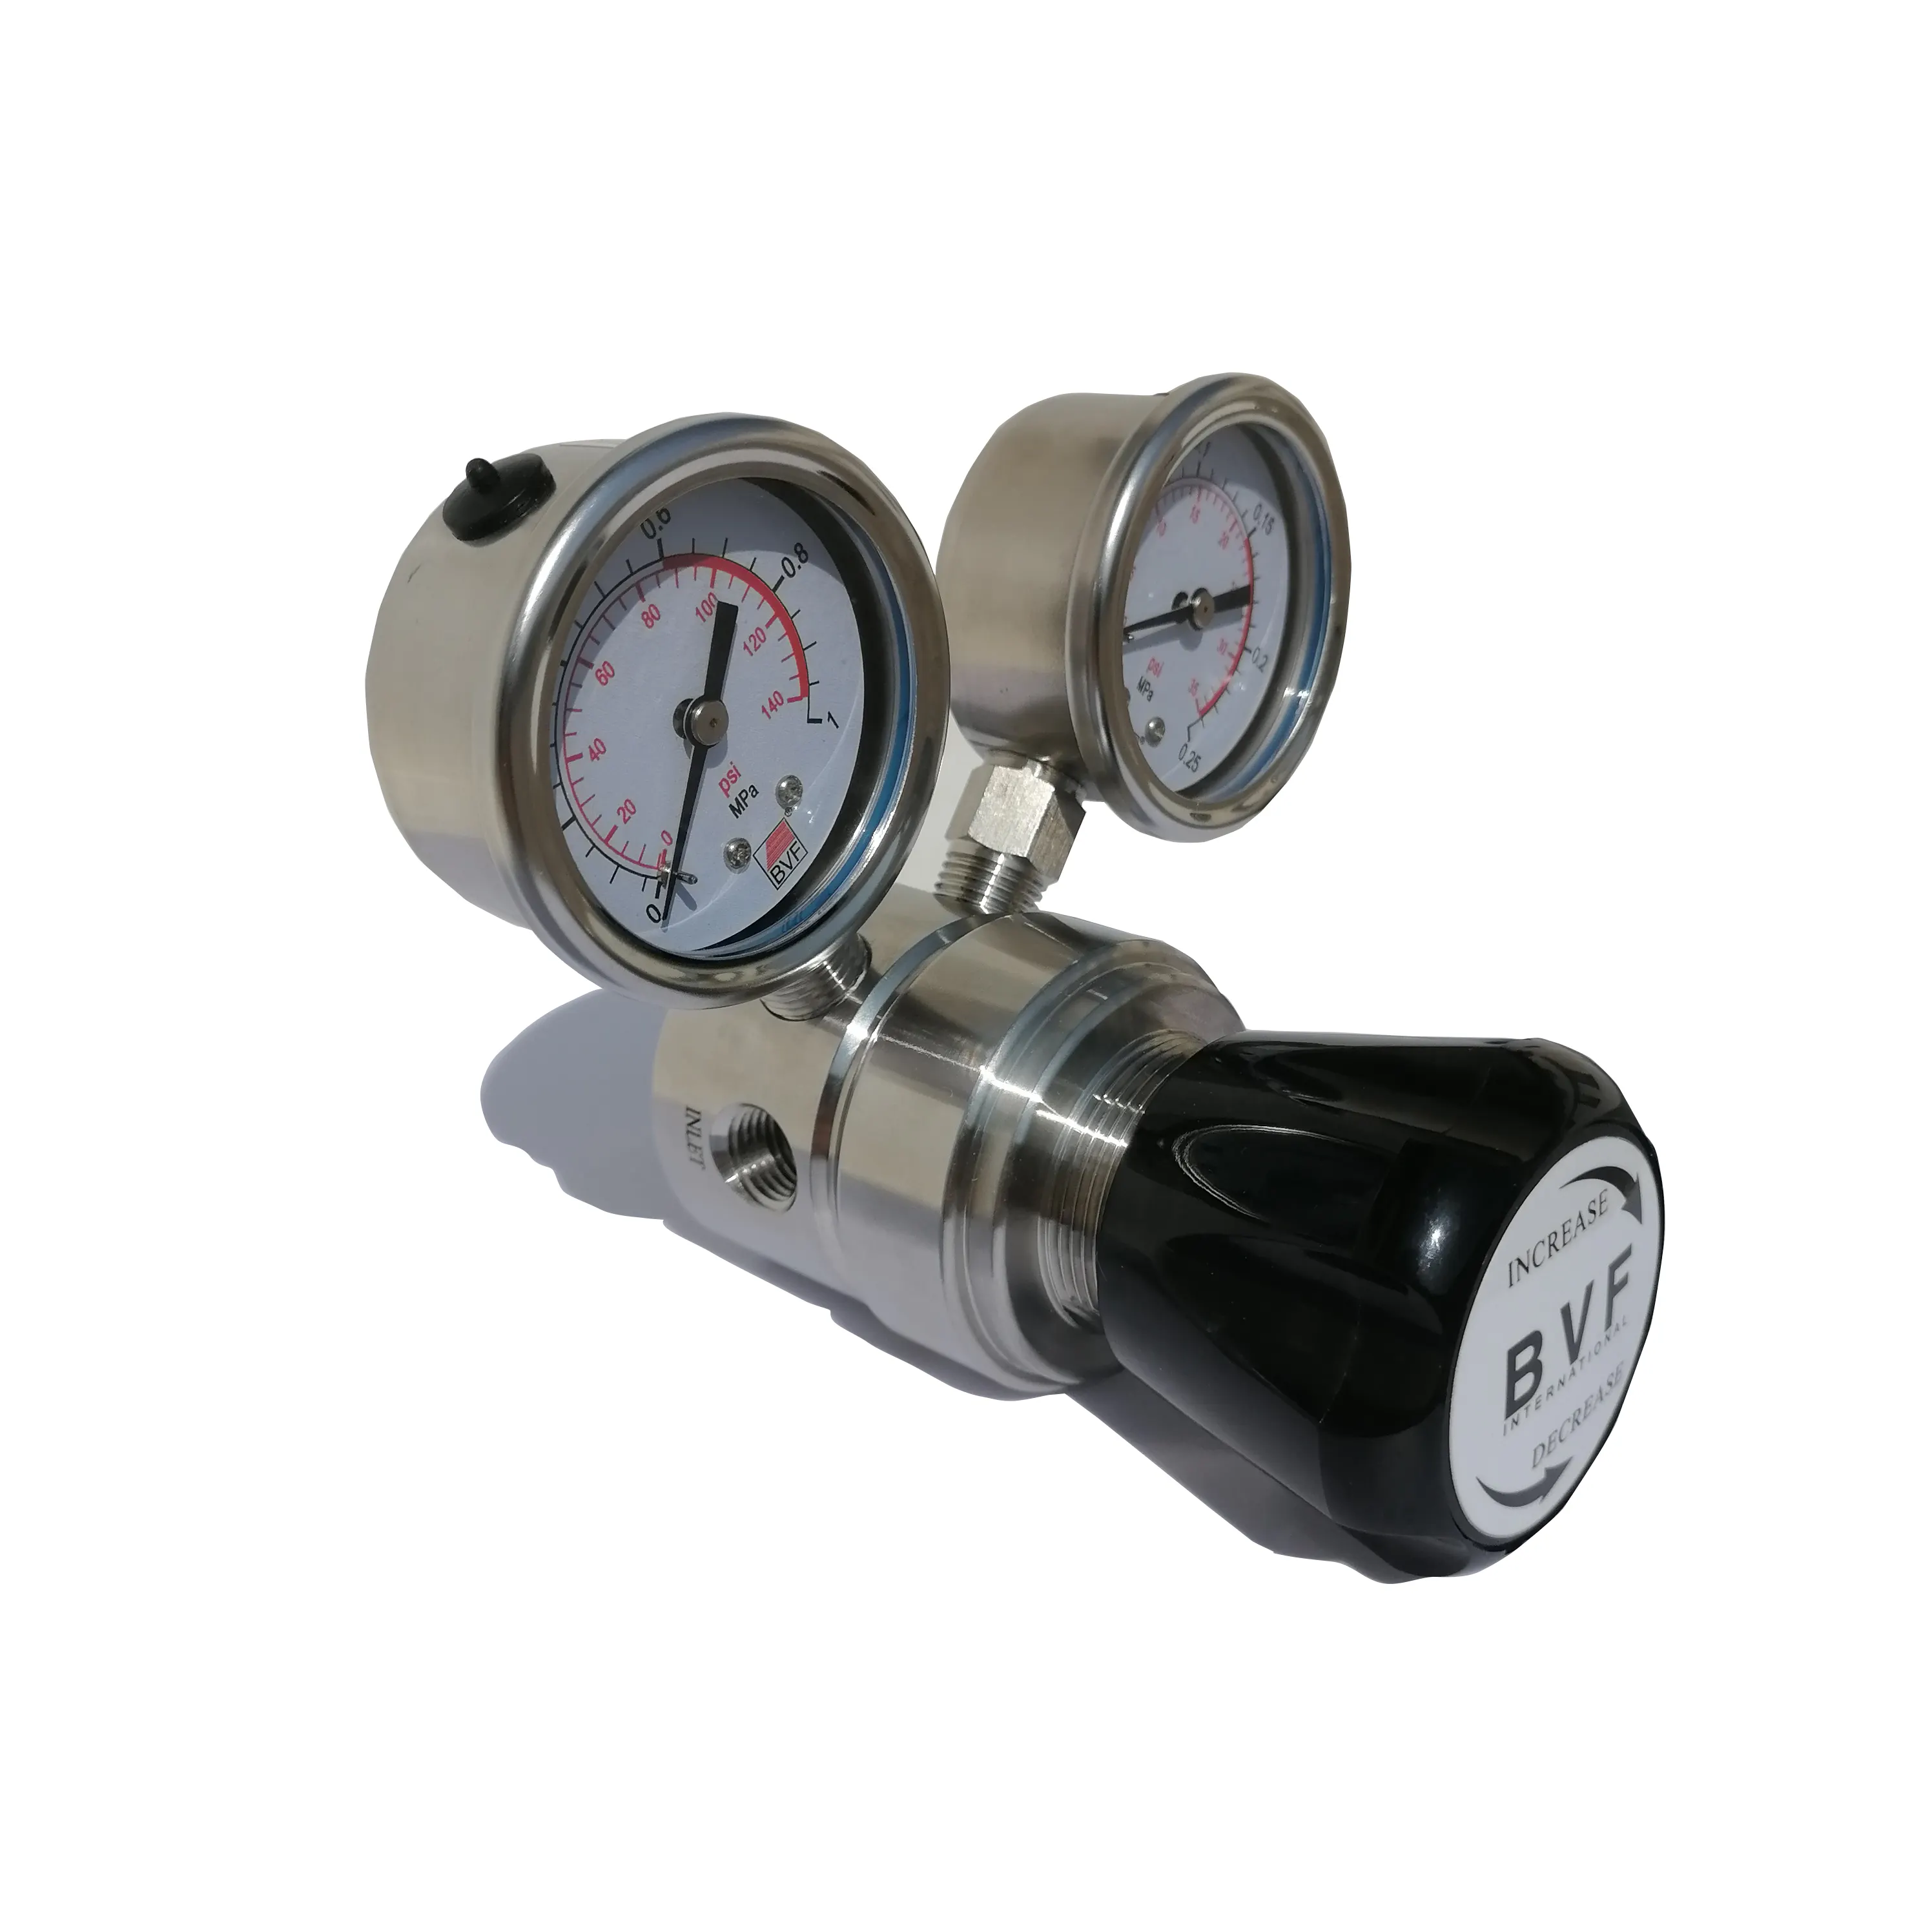 Stainless Steel High-precision Pressure Regulator For Corrosive Gases Or Liquids With A Maximum Operating Temperature Of +204